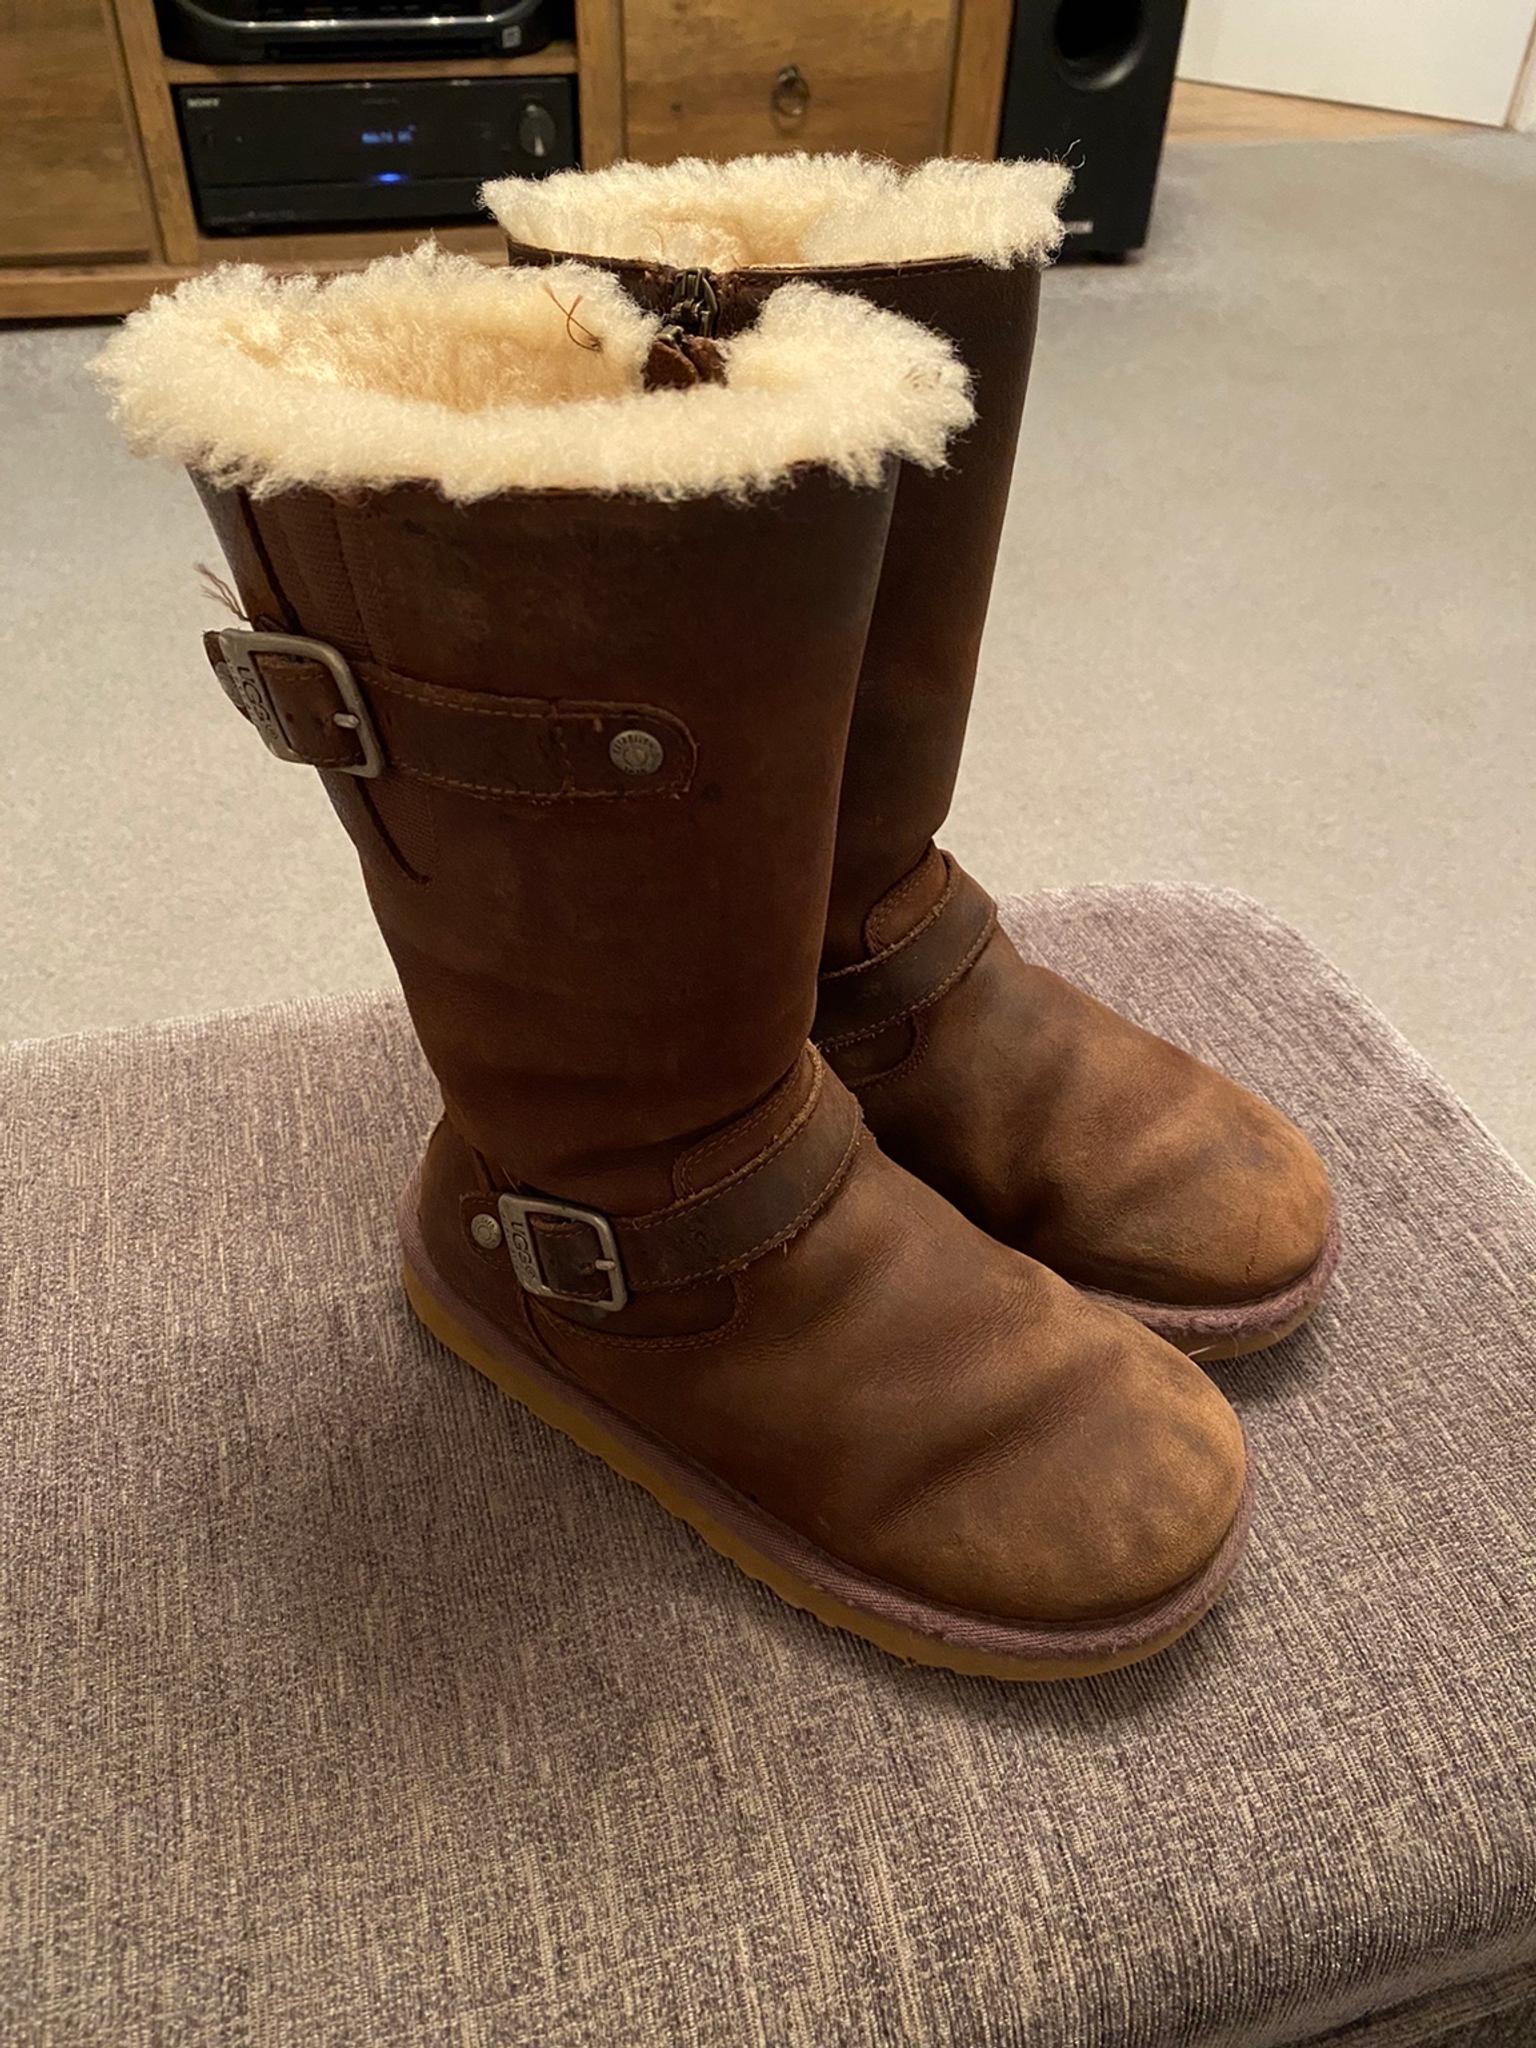 Girls UGG Boots size 13. in LE9 